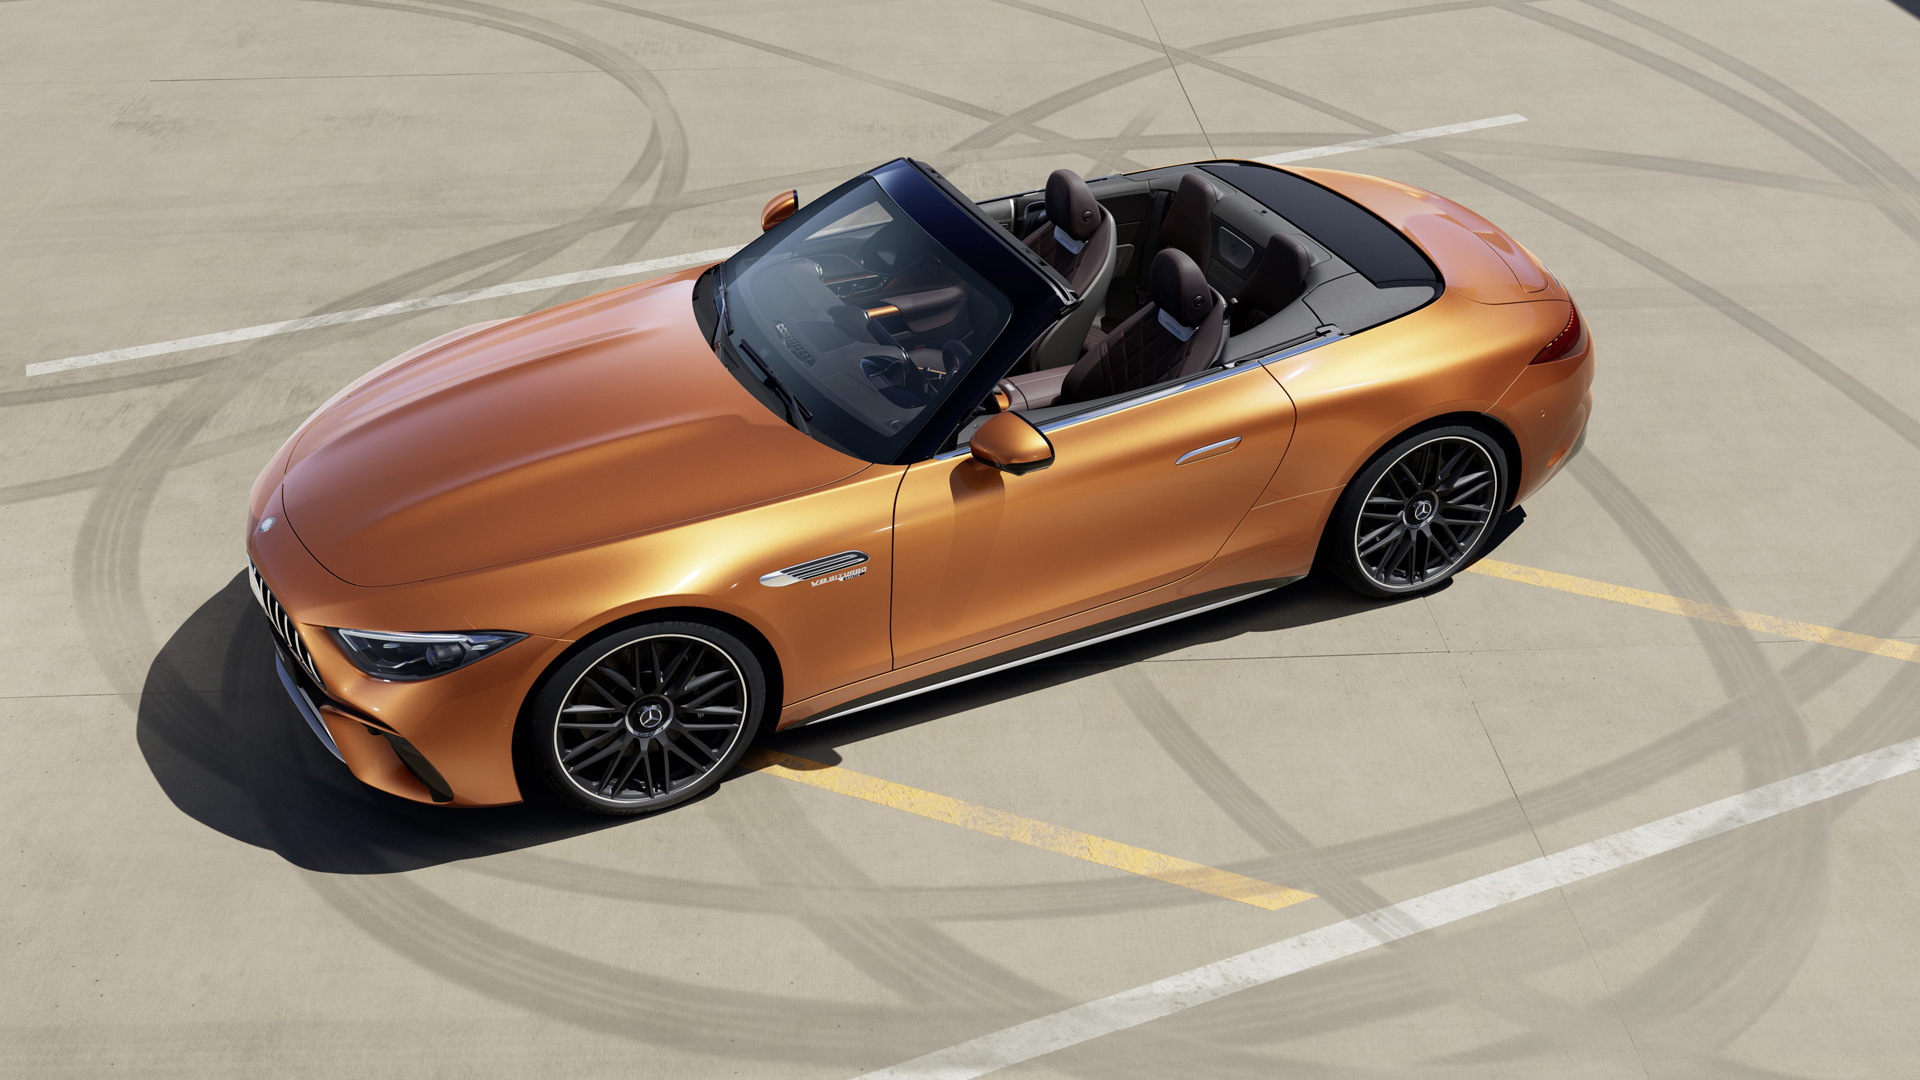 2020 Mercedes-Benz SLC Final Edition – Roadster Prepares to Say Goodbye